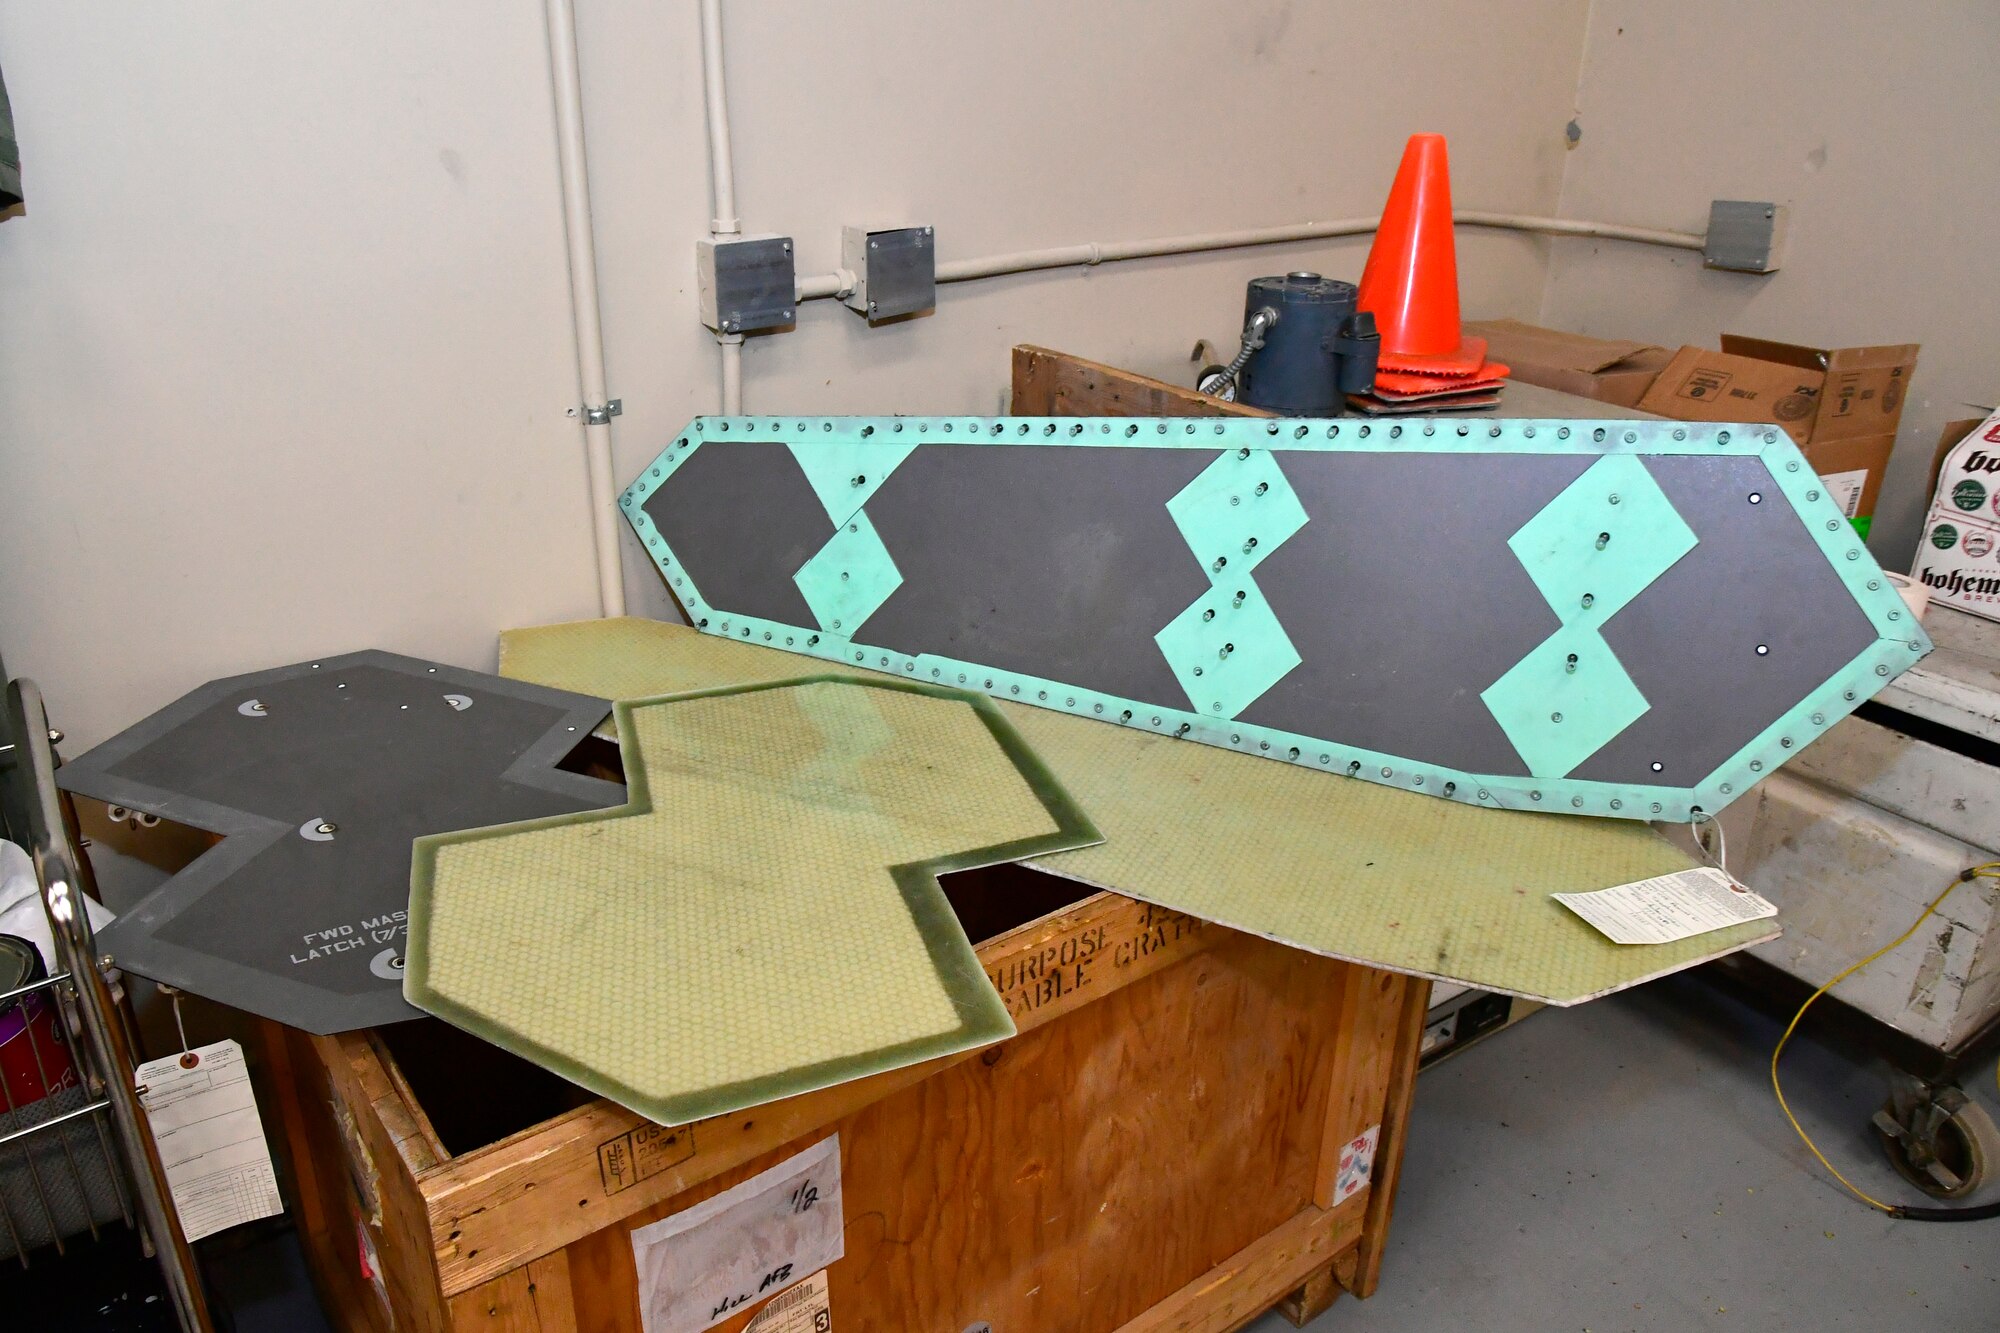 Fabricated F-35 replacement panels made by the Air Force Life Cycle Management Center advanced composite office, ready for installation May 4, 2022, at Hill Air Force Base, Utah. The panels will be used in place of those that were damaged or missing on a salvage F-35B cockpit section being turned into a sectional training aids by the 372nd Training Squadron, Det. 3, for use during instruction of F-35 maintainers. (U.S. Air Force photo by Todd Cromar)